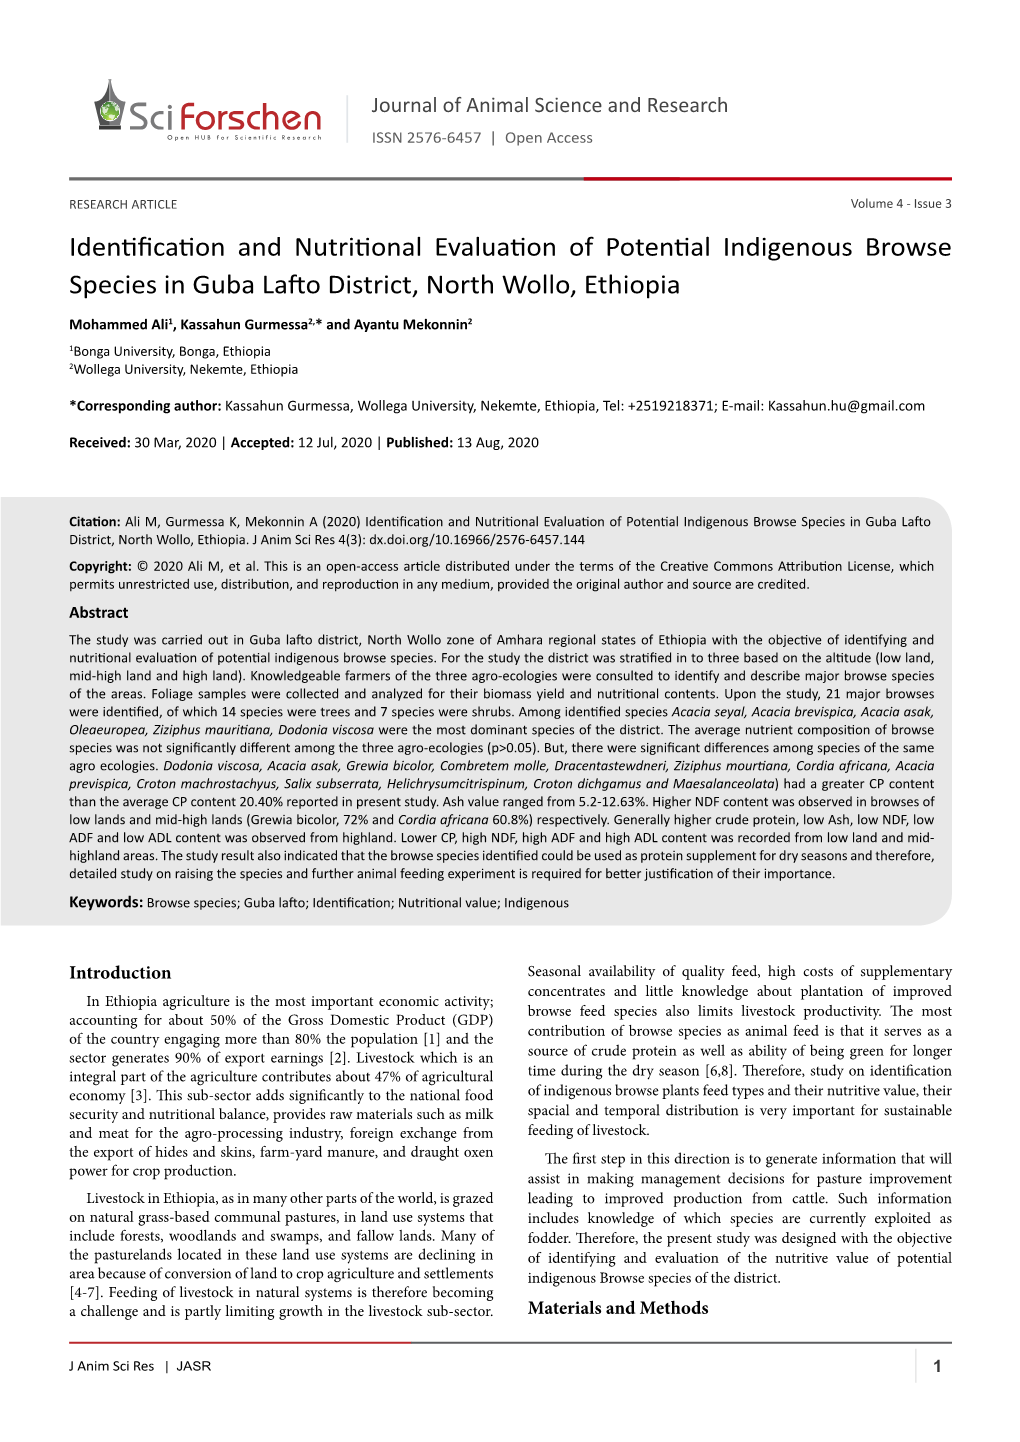 Identification and Nutritional Evaluation of Potential Indigenous Browse Species in Guba Lafto District, North Wollo, Ethiopia